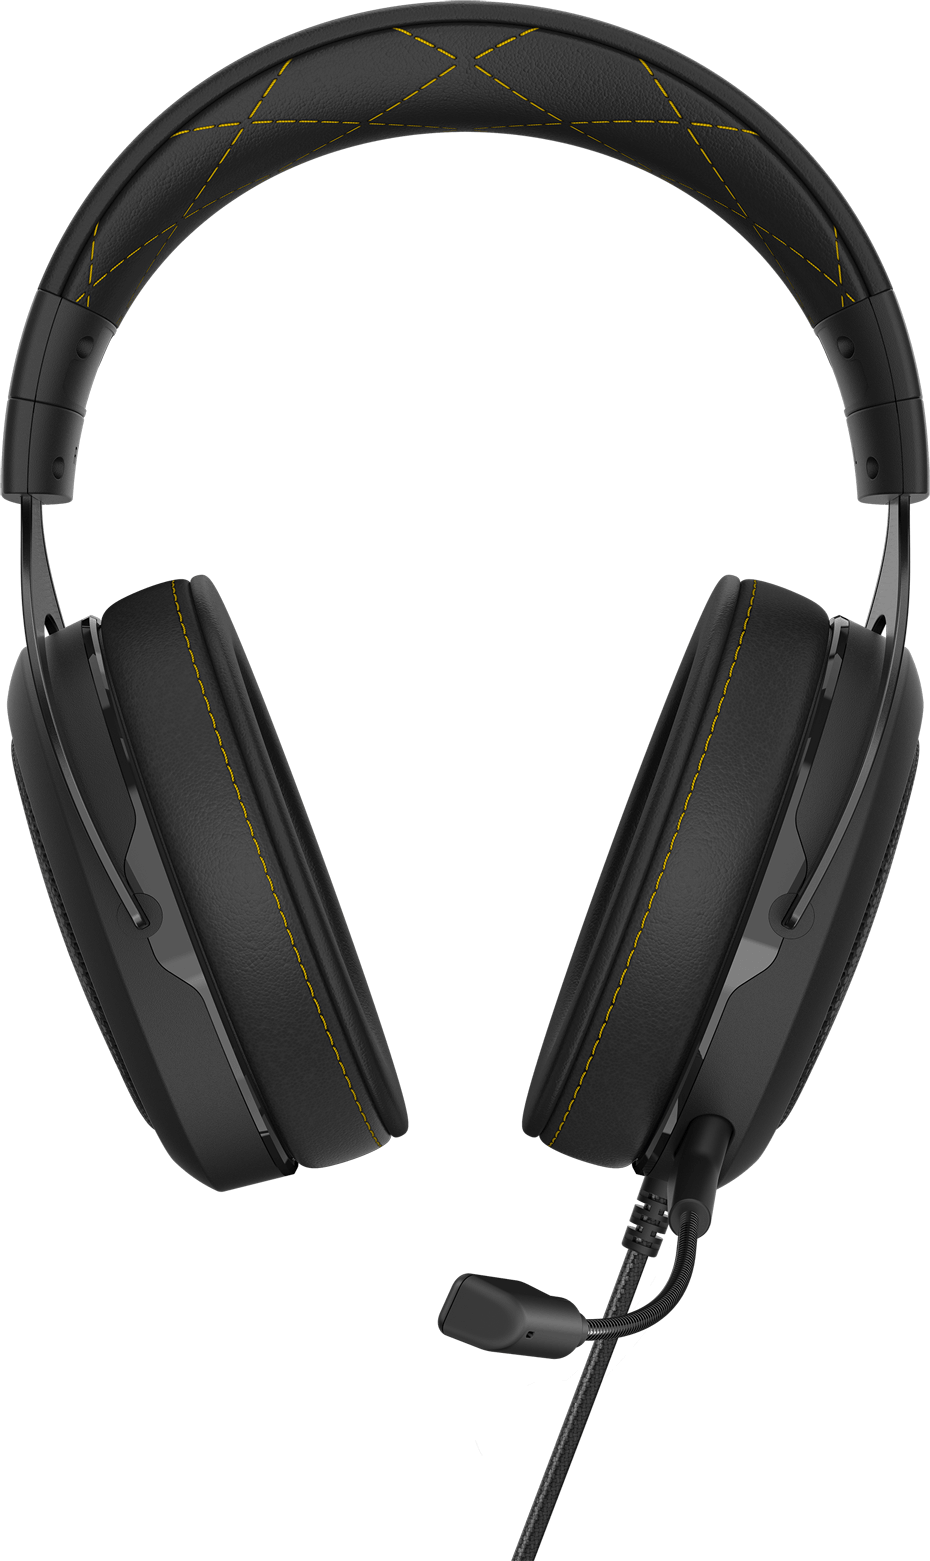 HS60 PRO GAMING HEADSET - CRAFTED FOR COMFORT